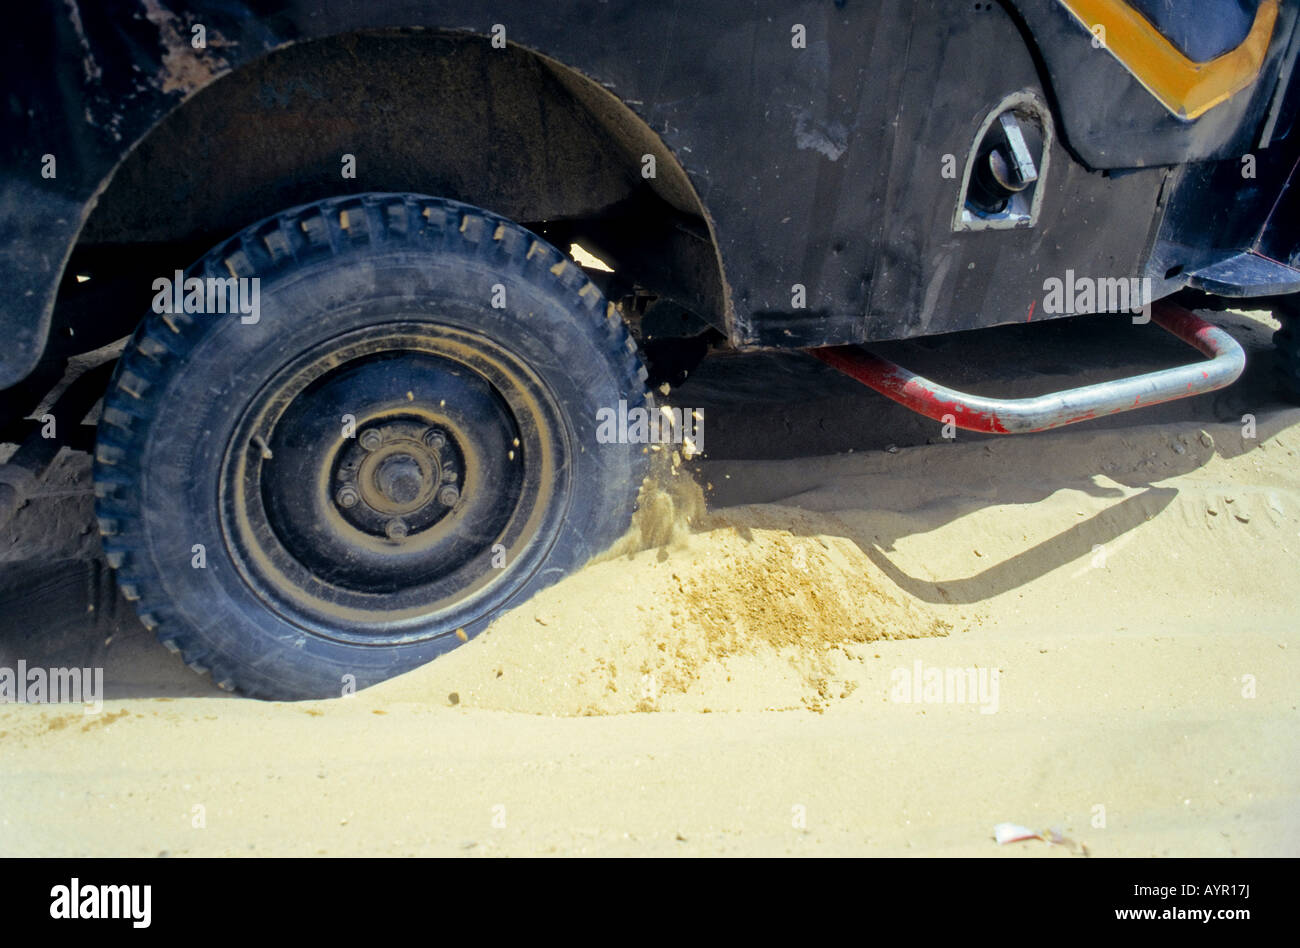 Off-road vehicle (4X4) tires spinning in the desert sand, Ladakh, India Stock Photo